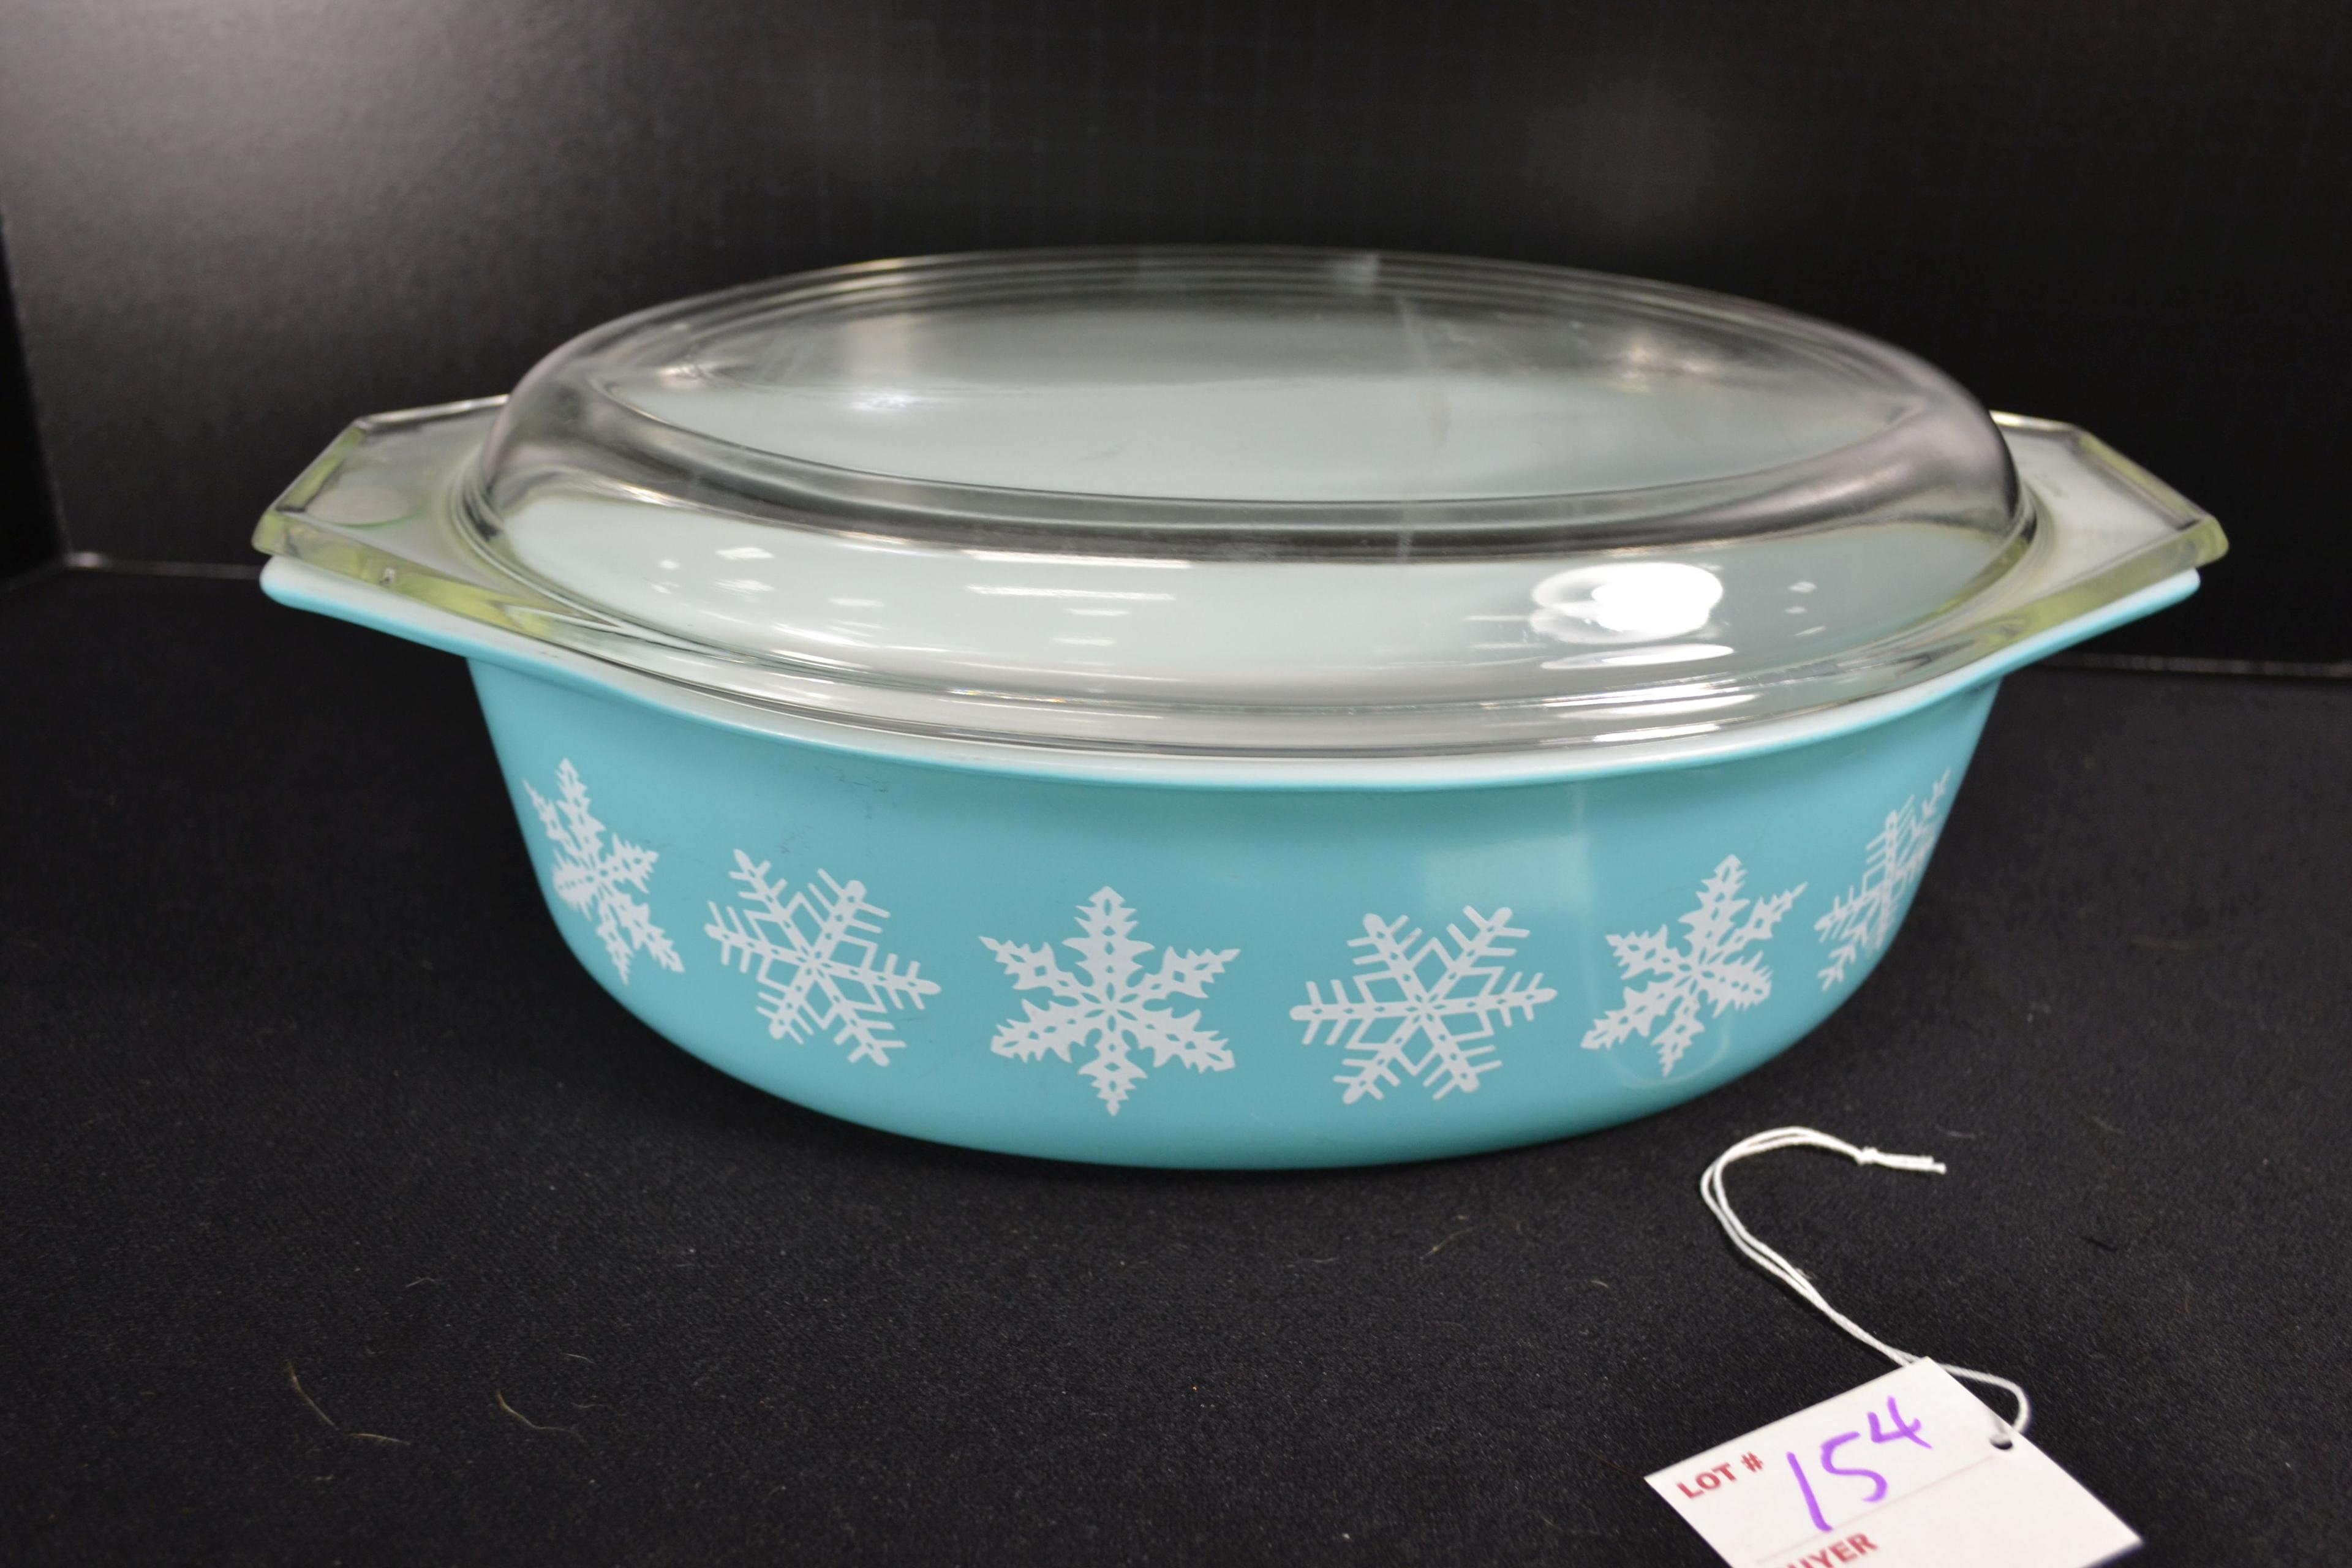 Pyrex White Snowflake on Turquoise No. 045 Casserole w/Lid; Mfg. 1956-1967